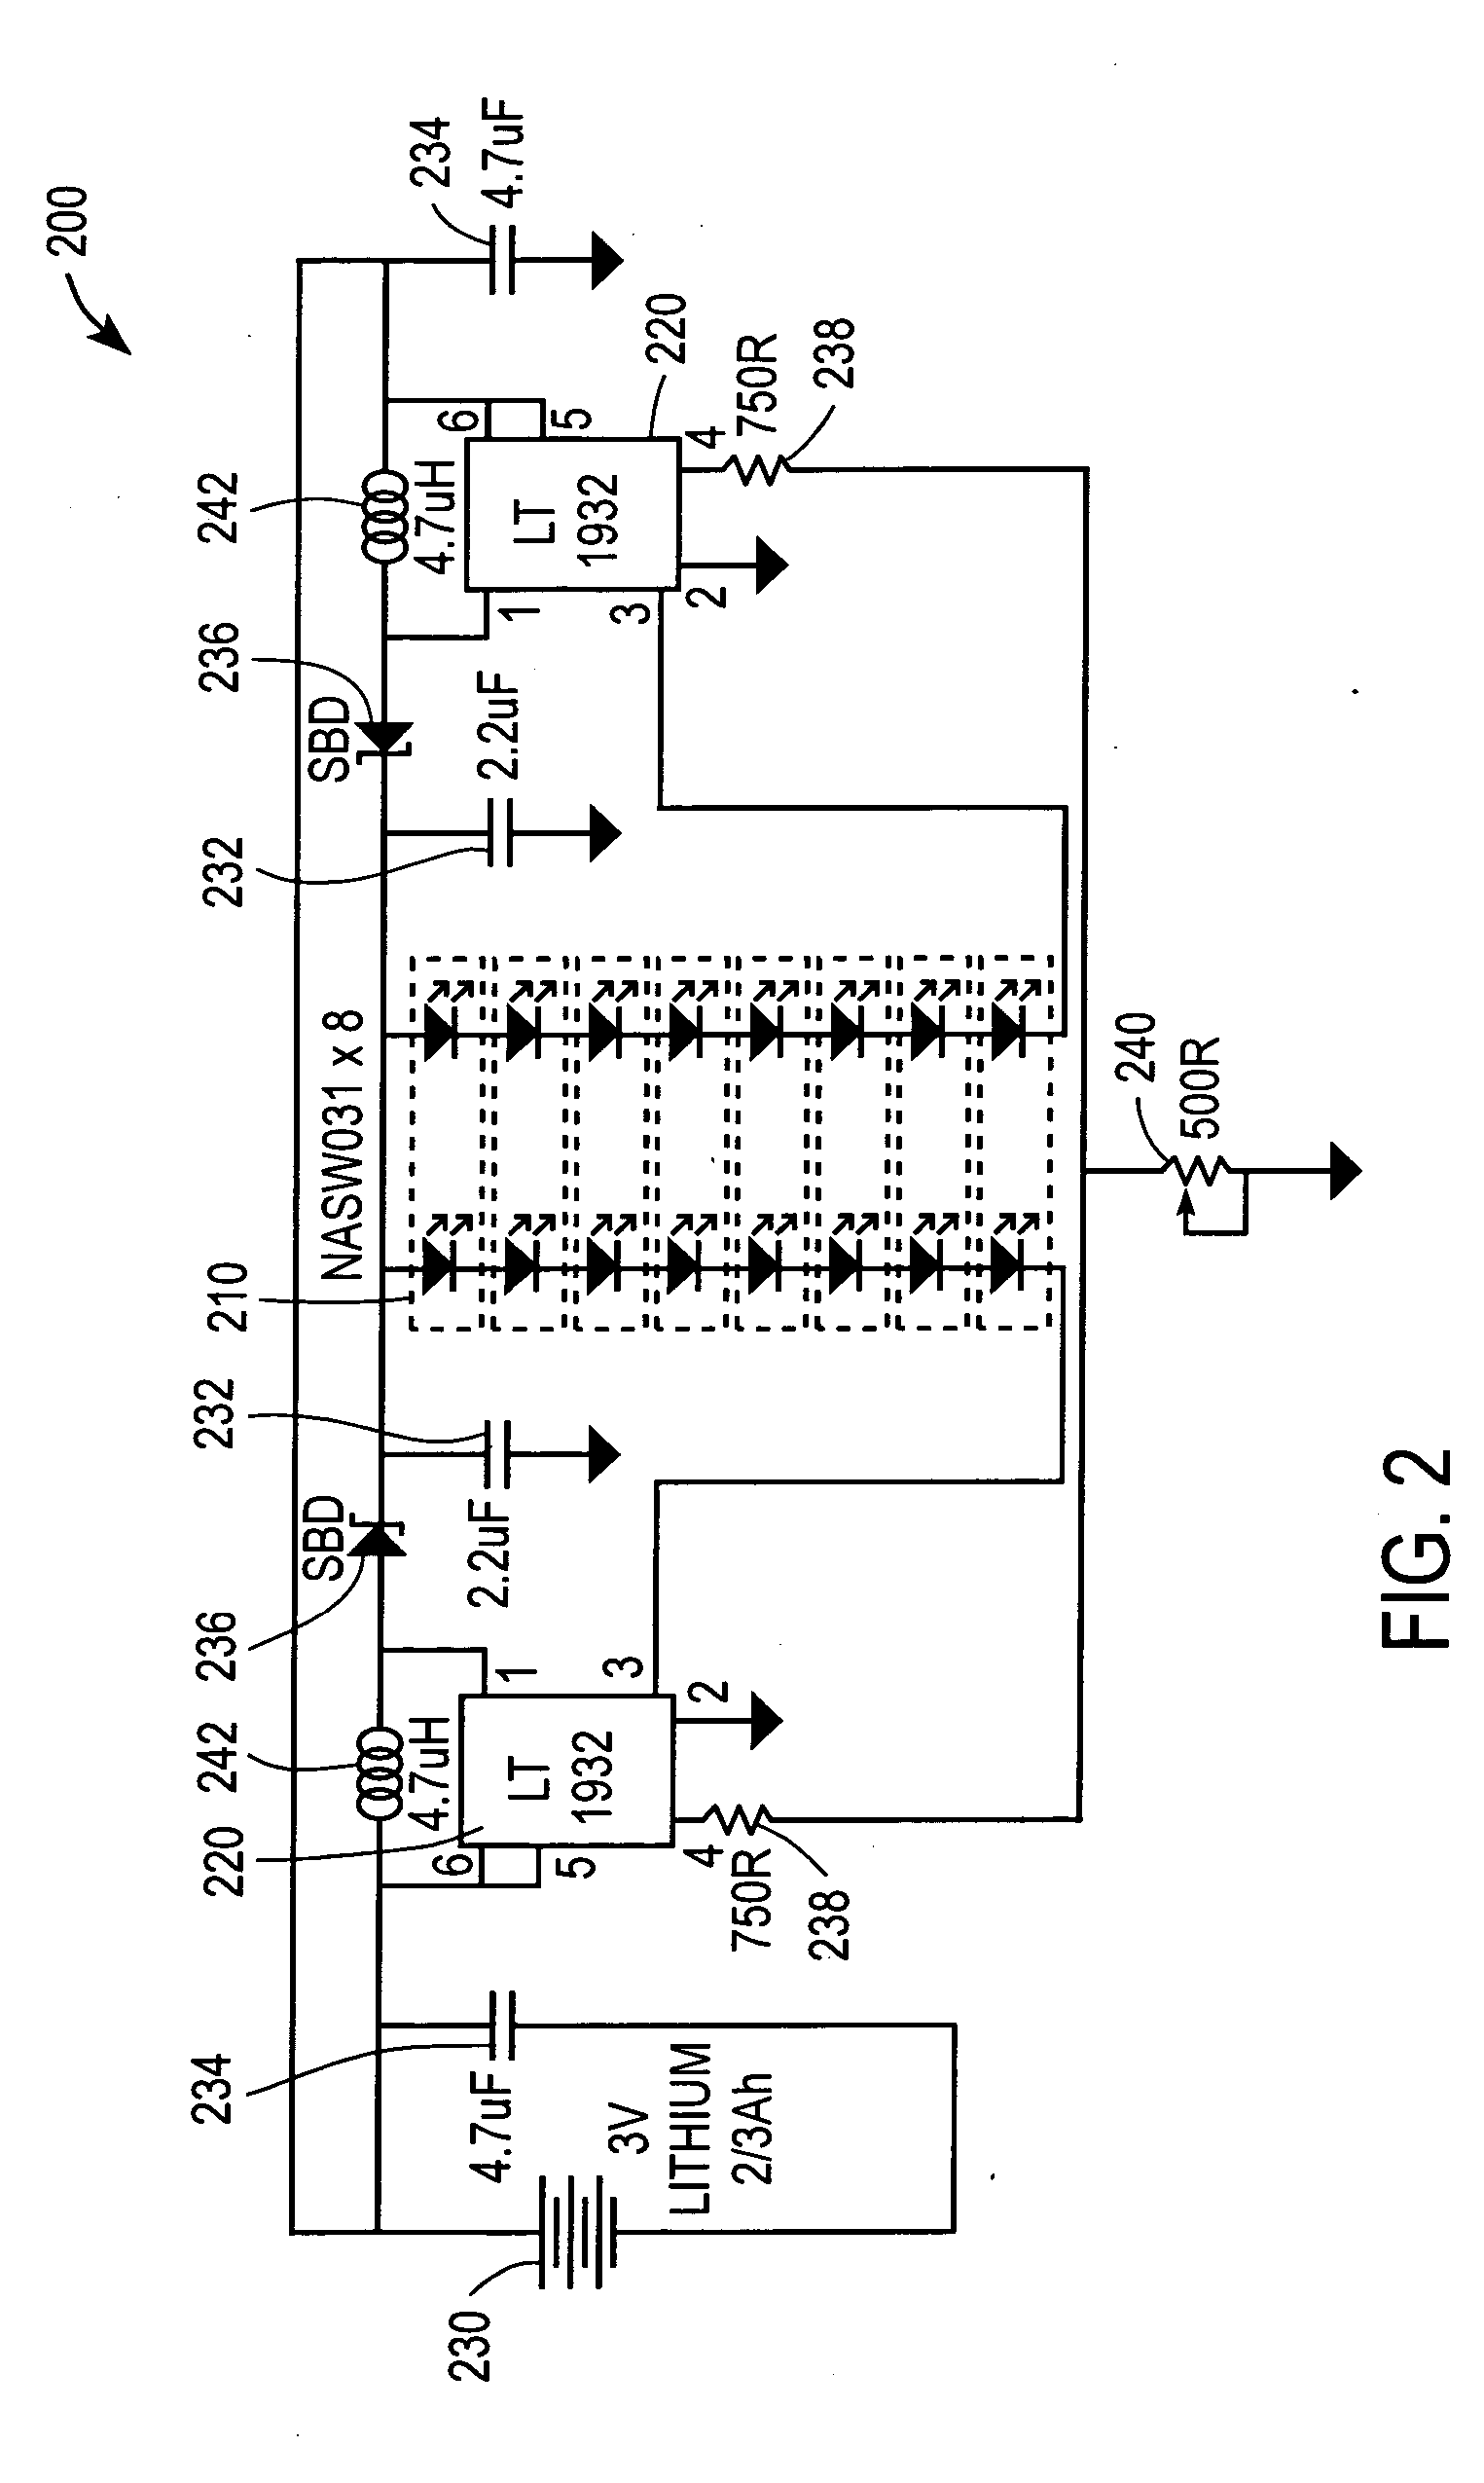 LED lighting apparatus and method of using same for illumination of a body cavity